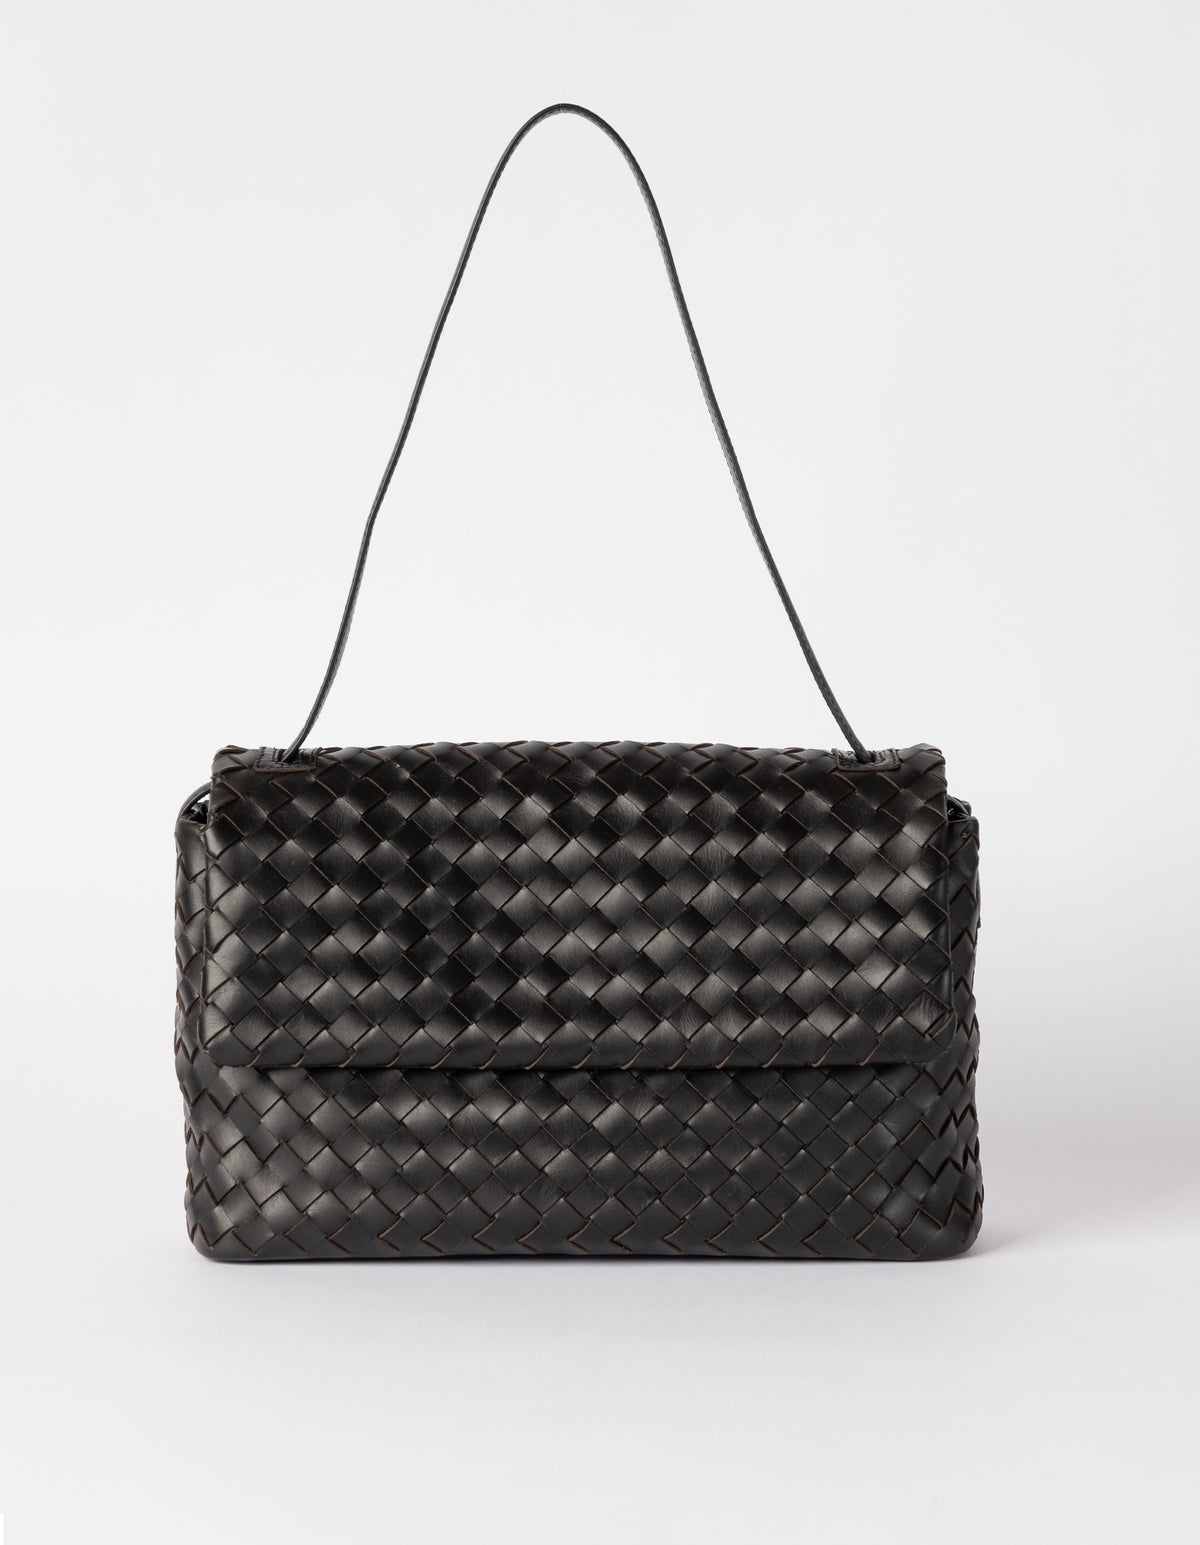 KENZIE, Black Woven Classic Leather